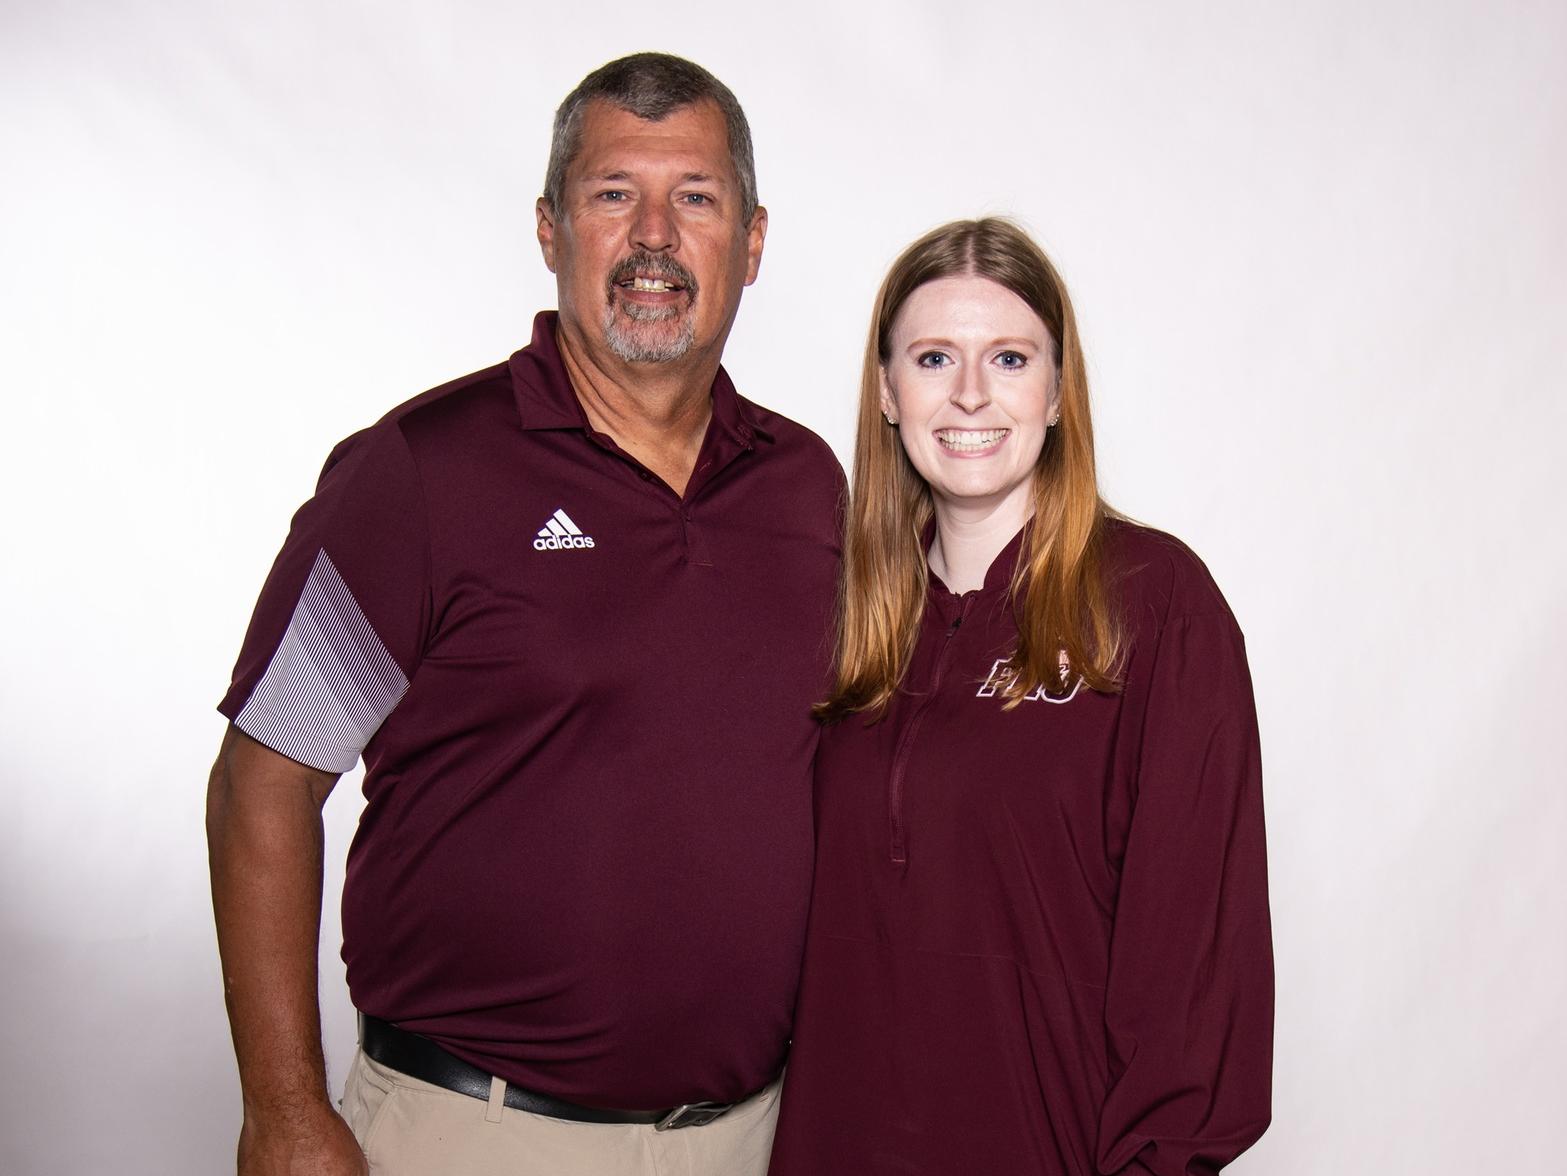 FHU Lady Lions Assistant Volleyball Coach Cunningham promoted to Head Coach